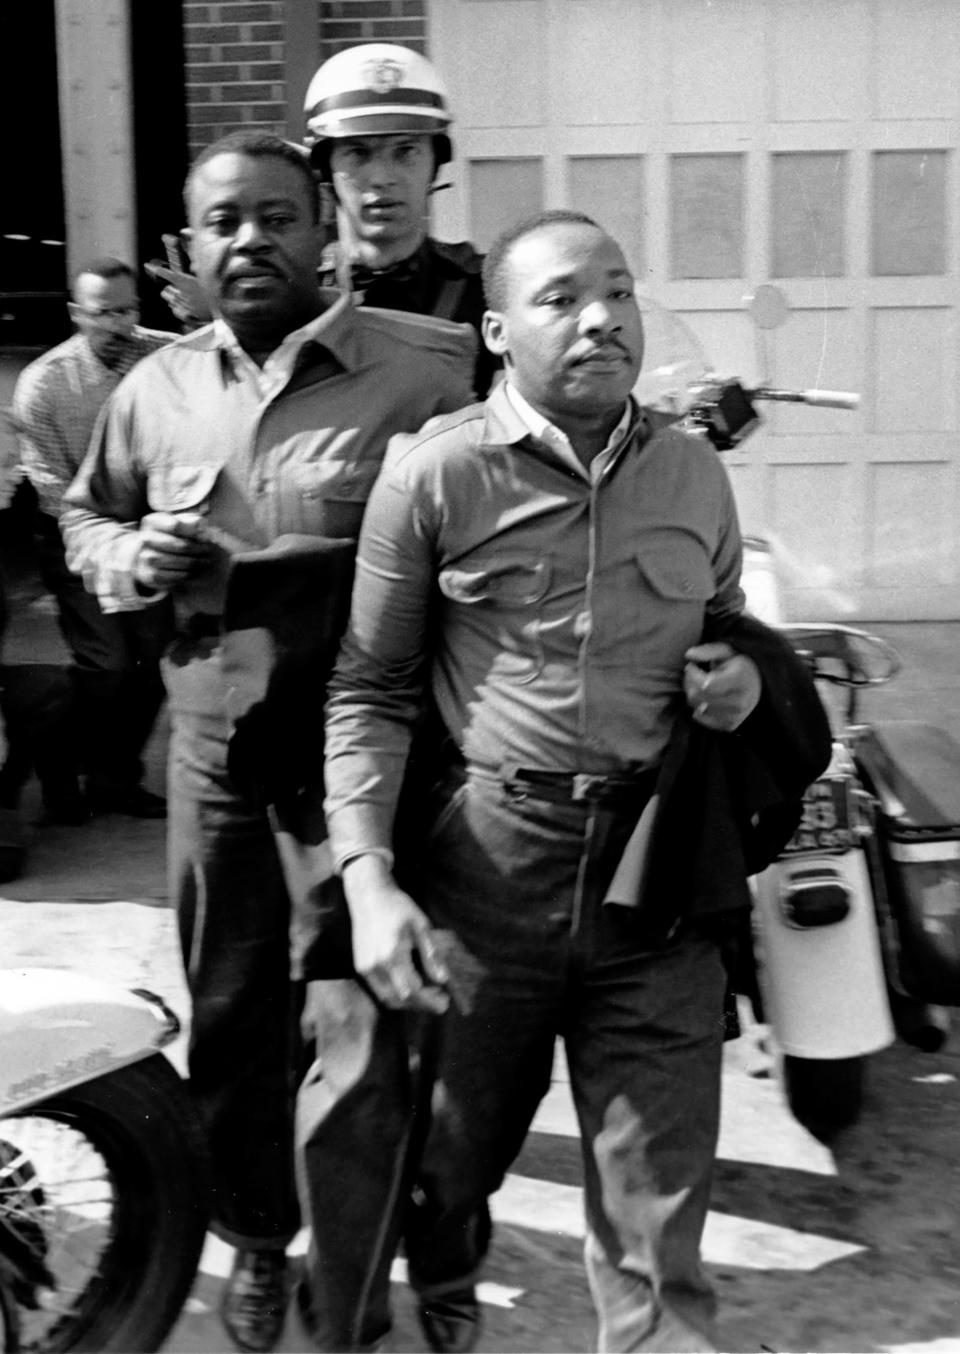 The Rev. Ralph Abernathy, left, and the Rev. Martin Luther King Jr., right are taken by a police officer as they lead a line of demonstrators into the business section of Birmingham, Ala., on April 12, 1963.